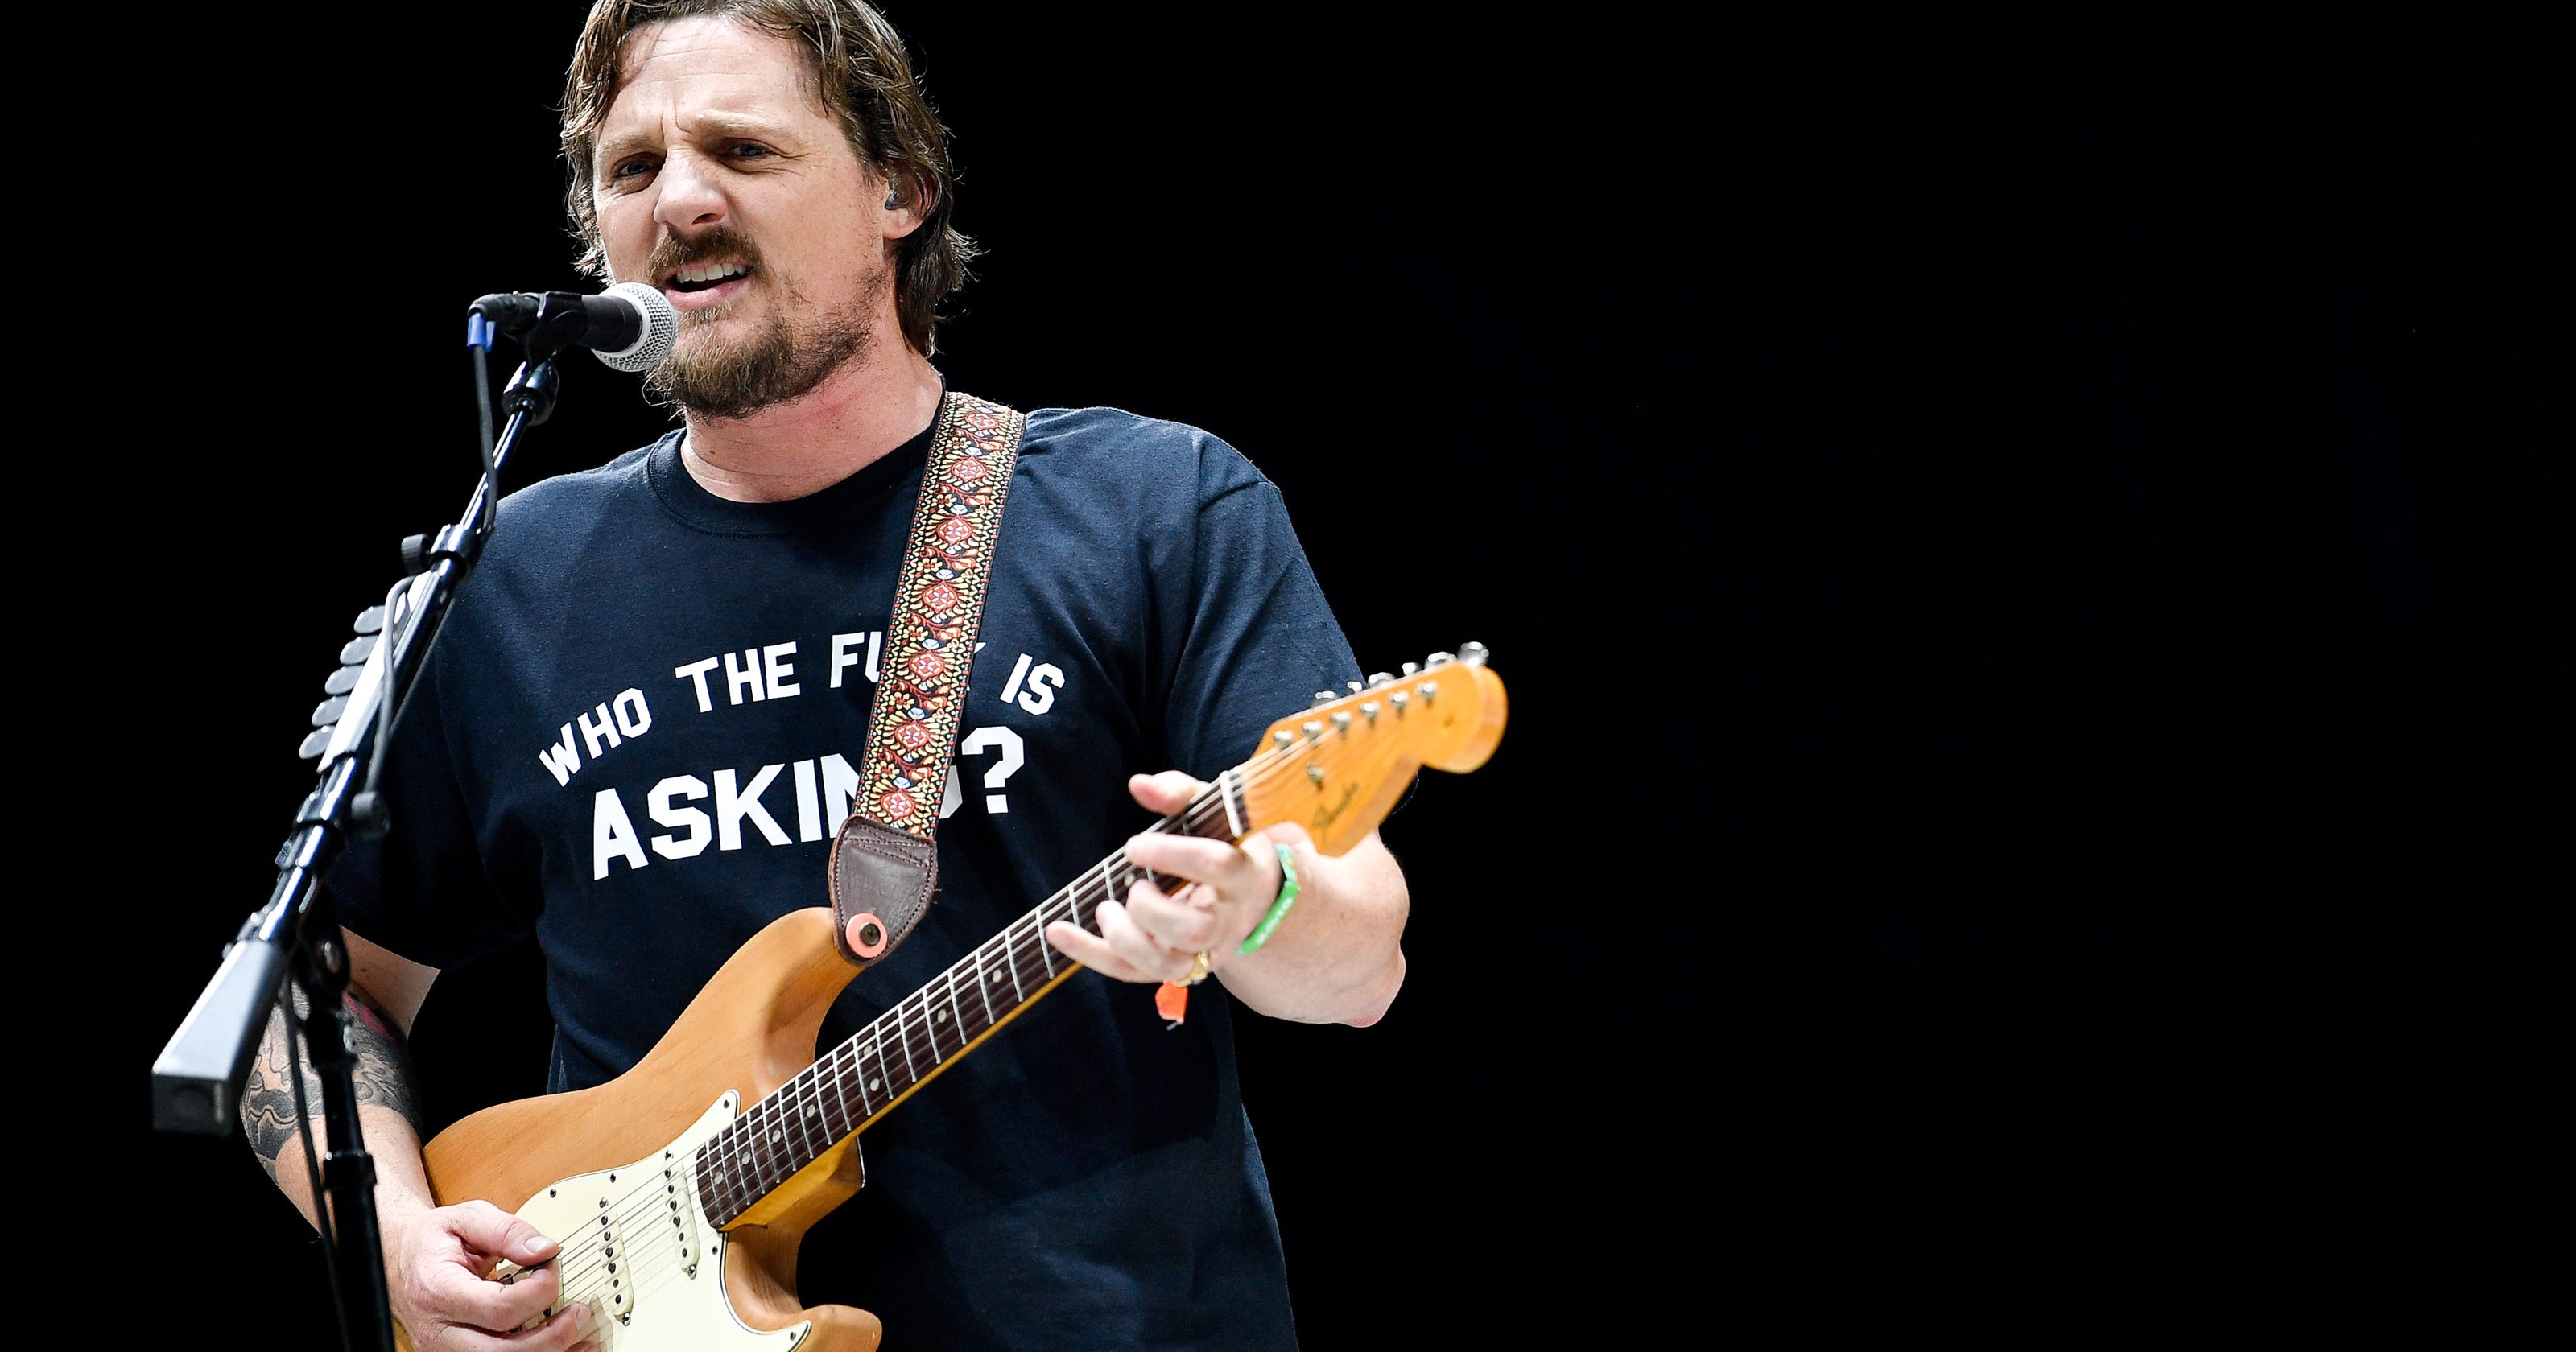 Sturgill Simpson releases 'The Dead Don't Die,' first new song in 3 years